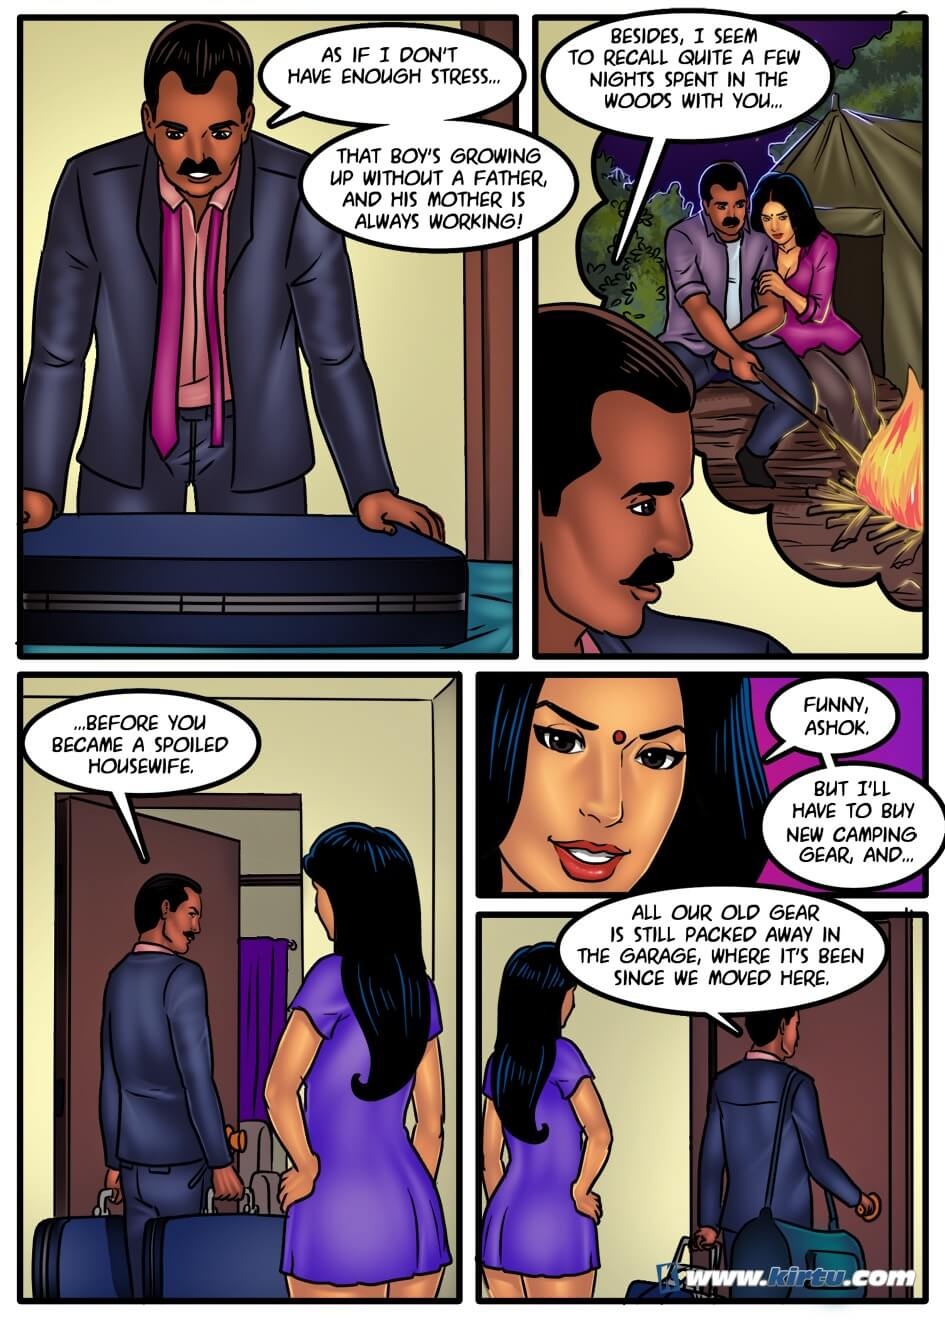 Savita bhabhi: Camping in the cold - Page 3 - HentaiEra